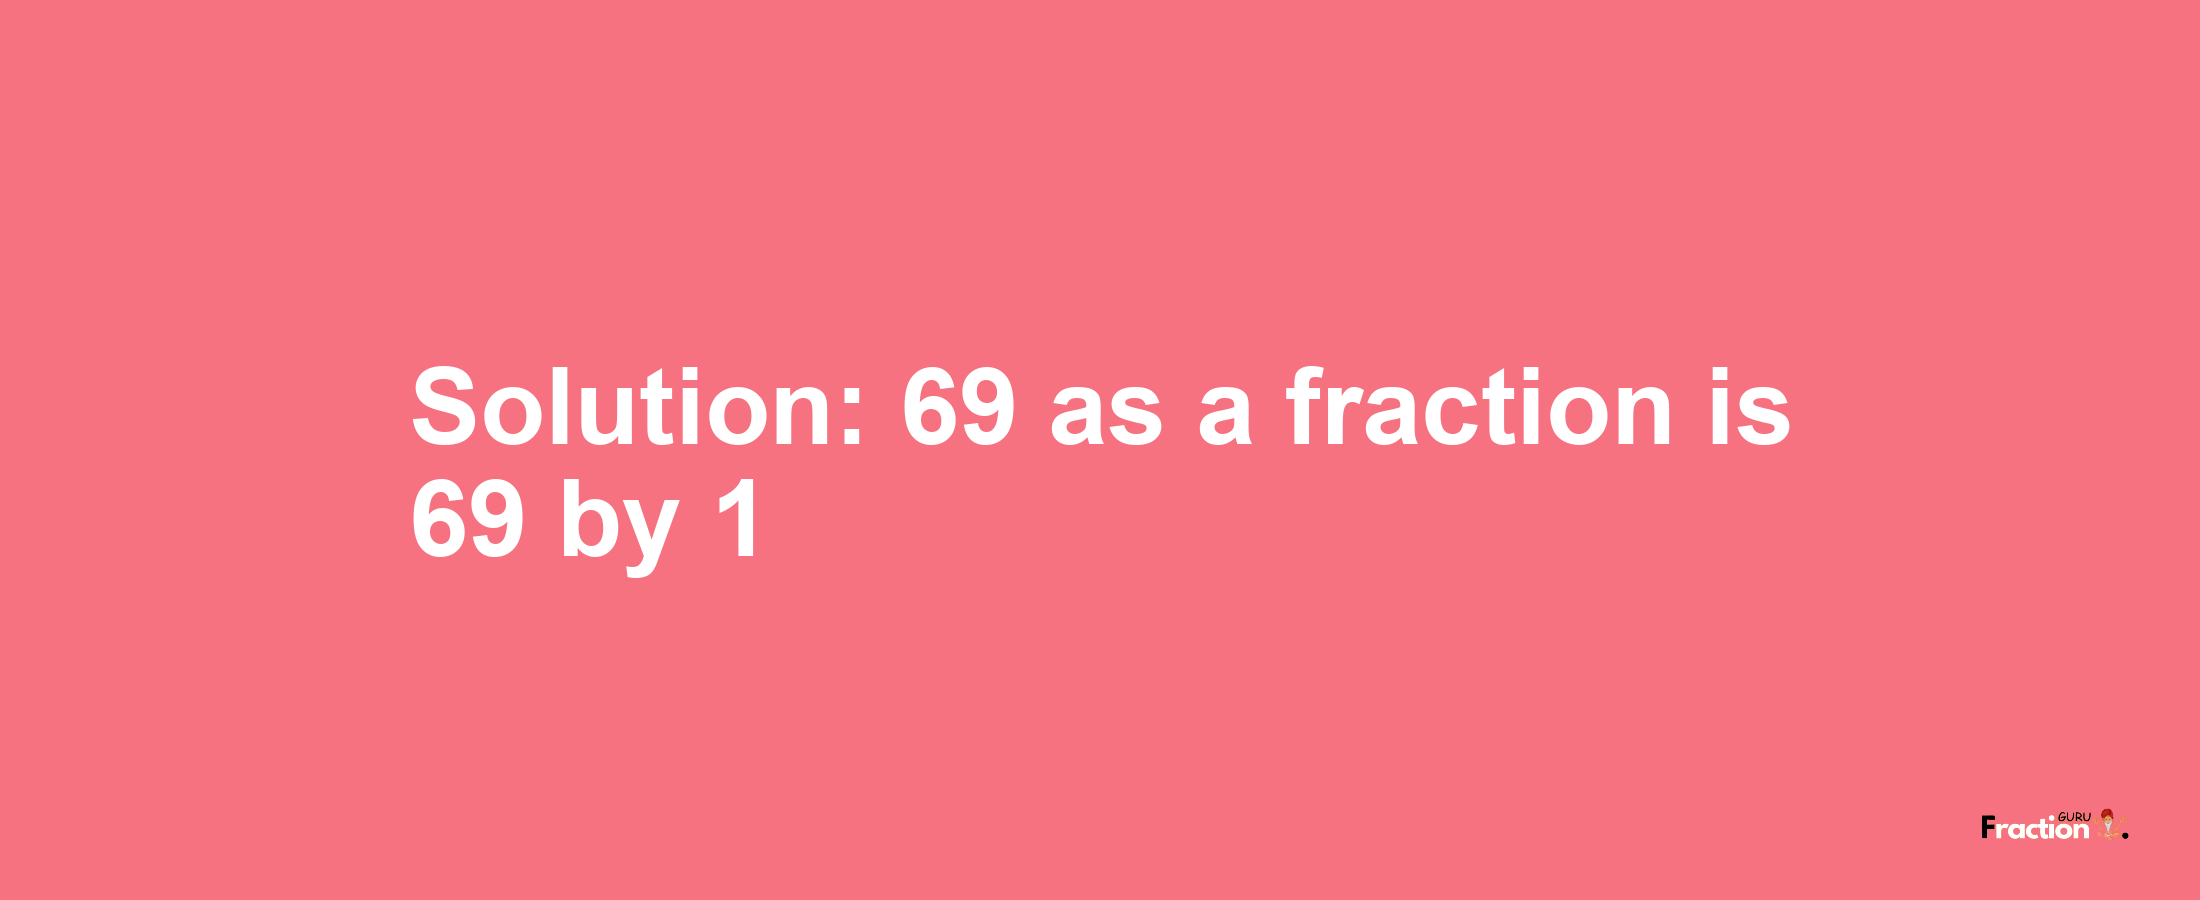 Solution:69 as a fraction is 69/1